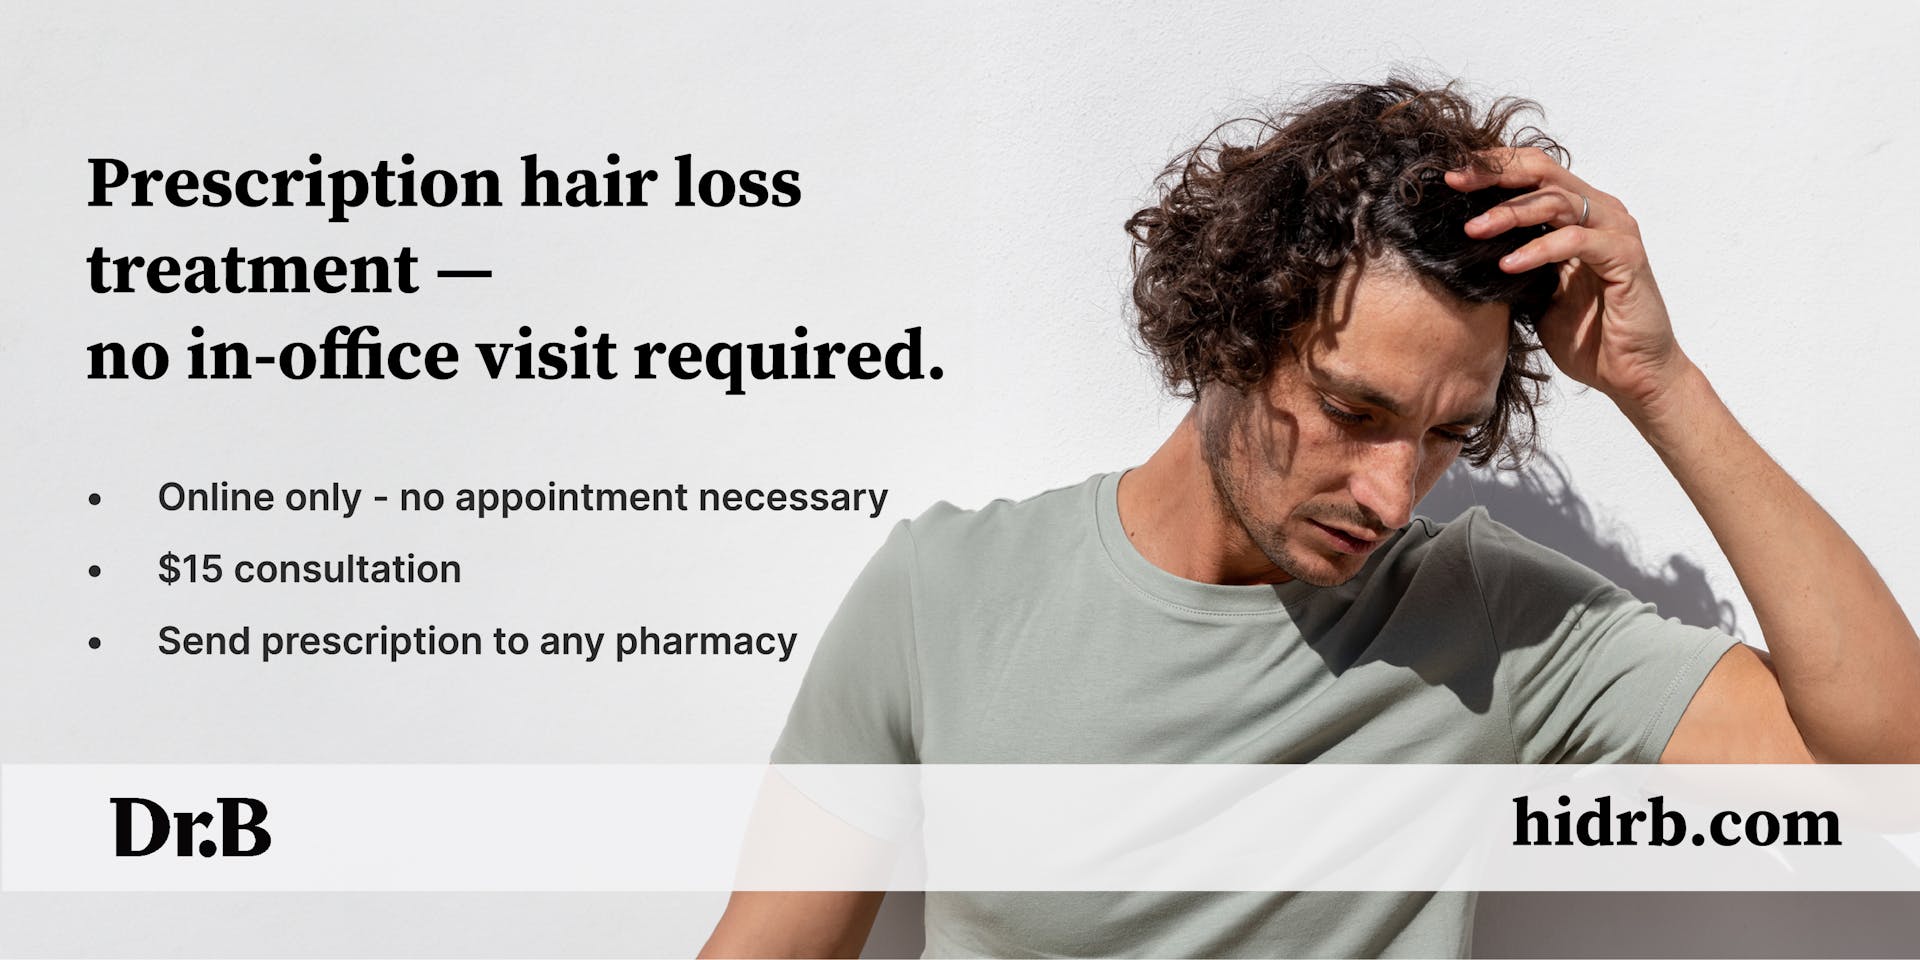 Banner advertising Dr. B's services for hair loss treatments